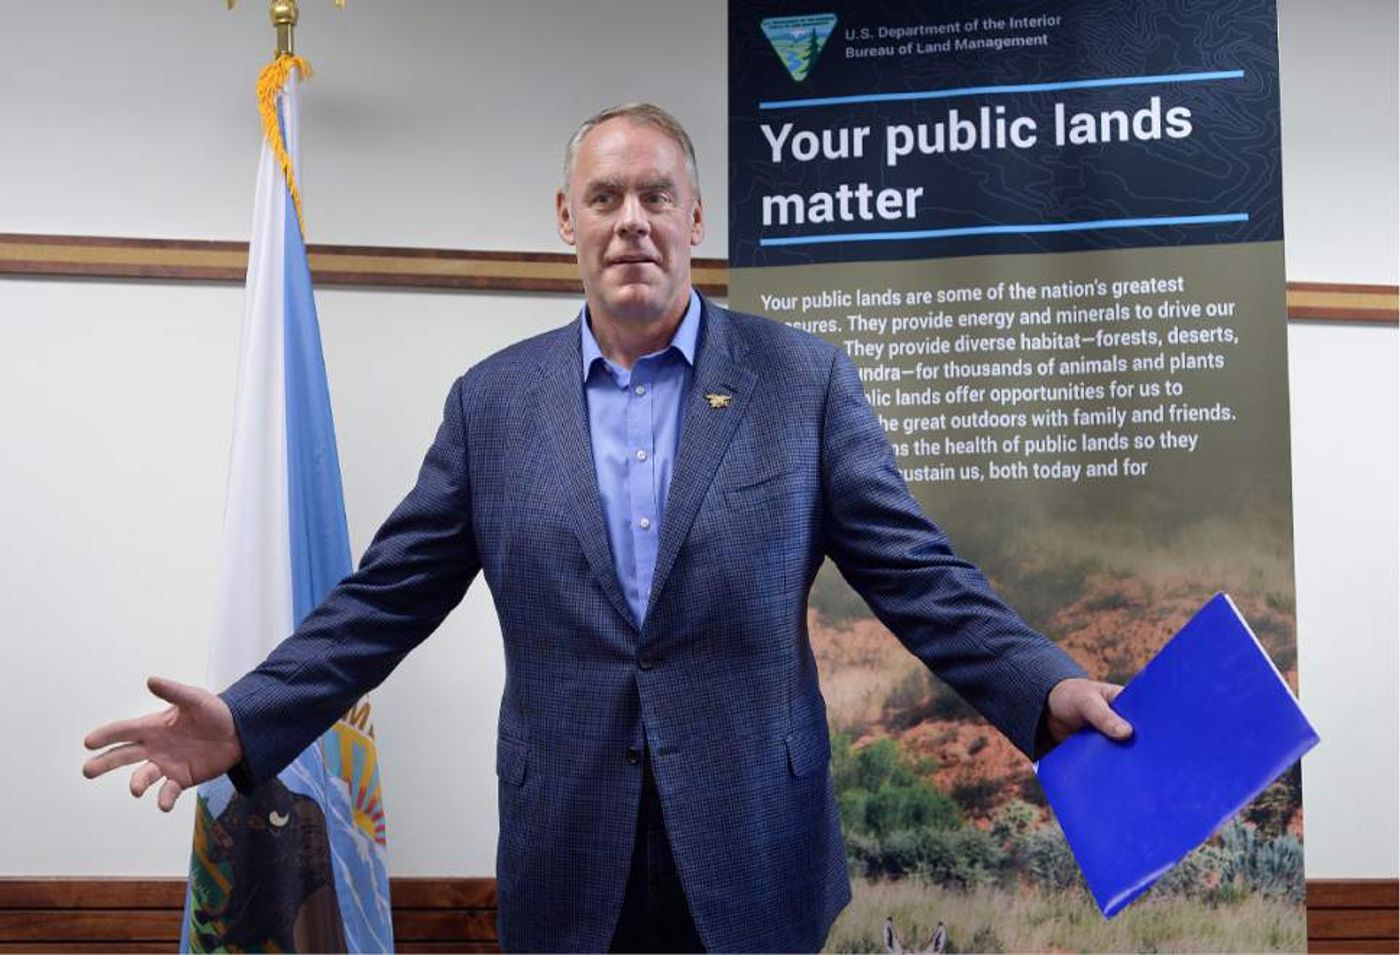 Interior Secretary Zinke, standing in front of a poster that says "Your public lands matter". Photo: Salt Lake City News Archive